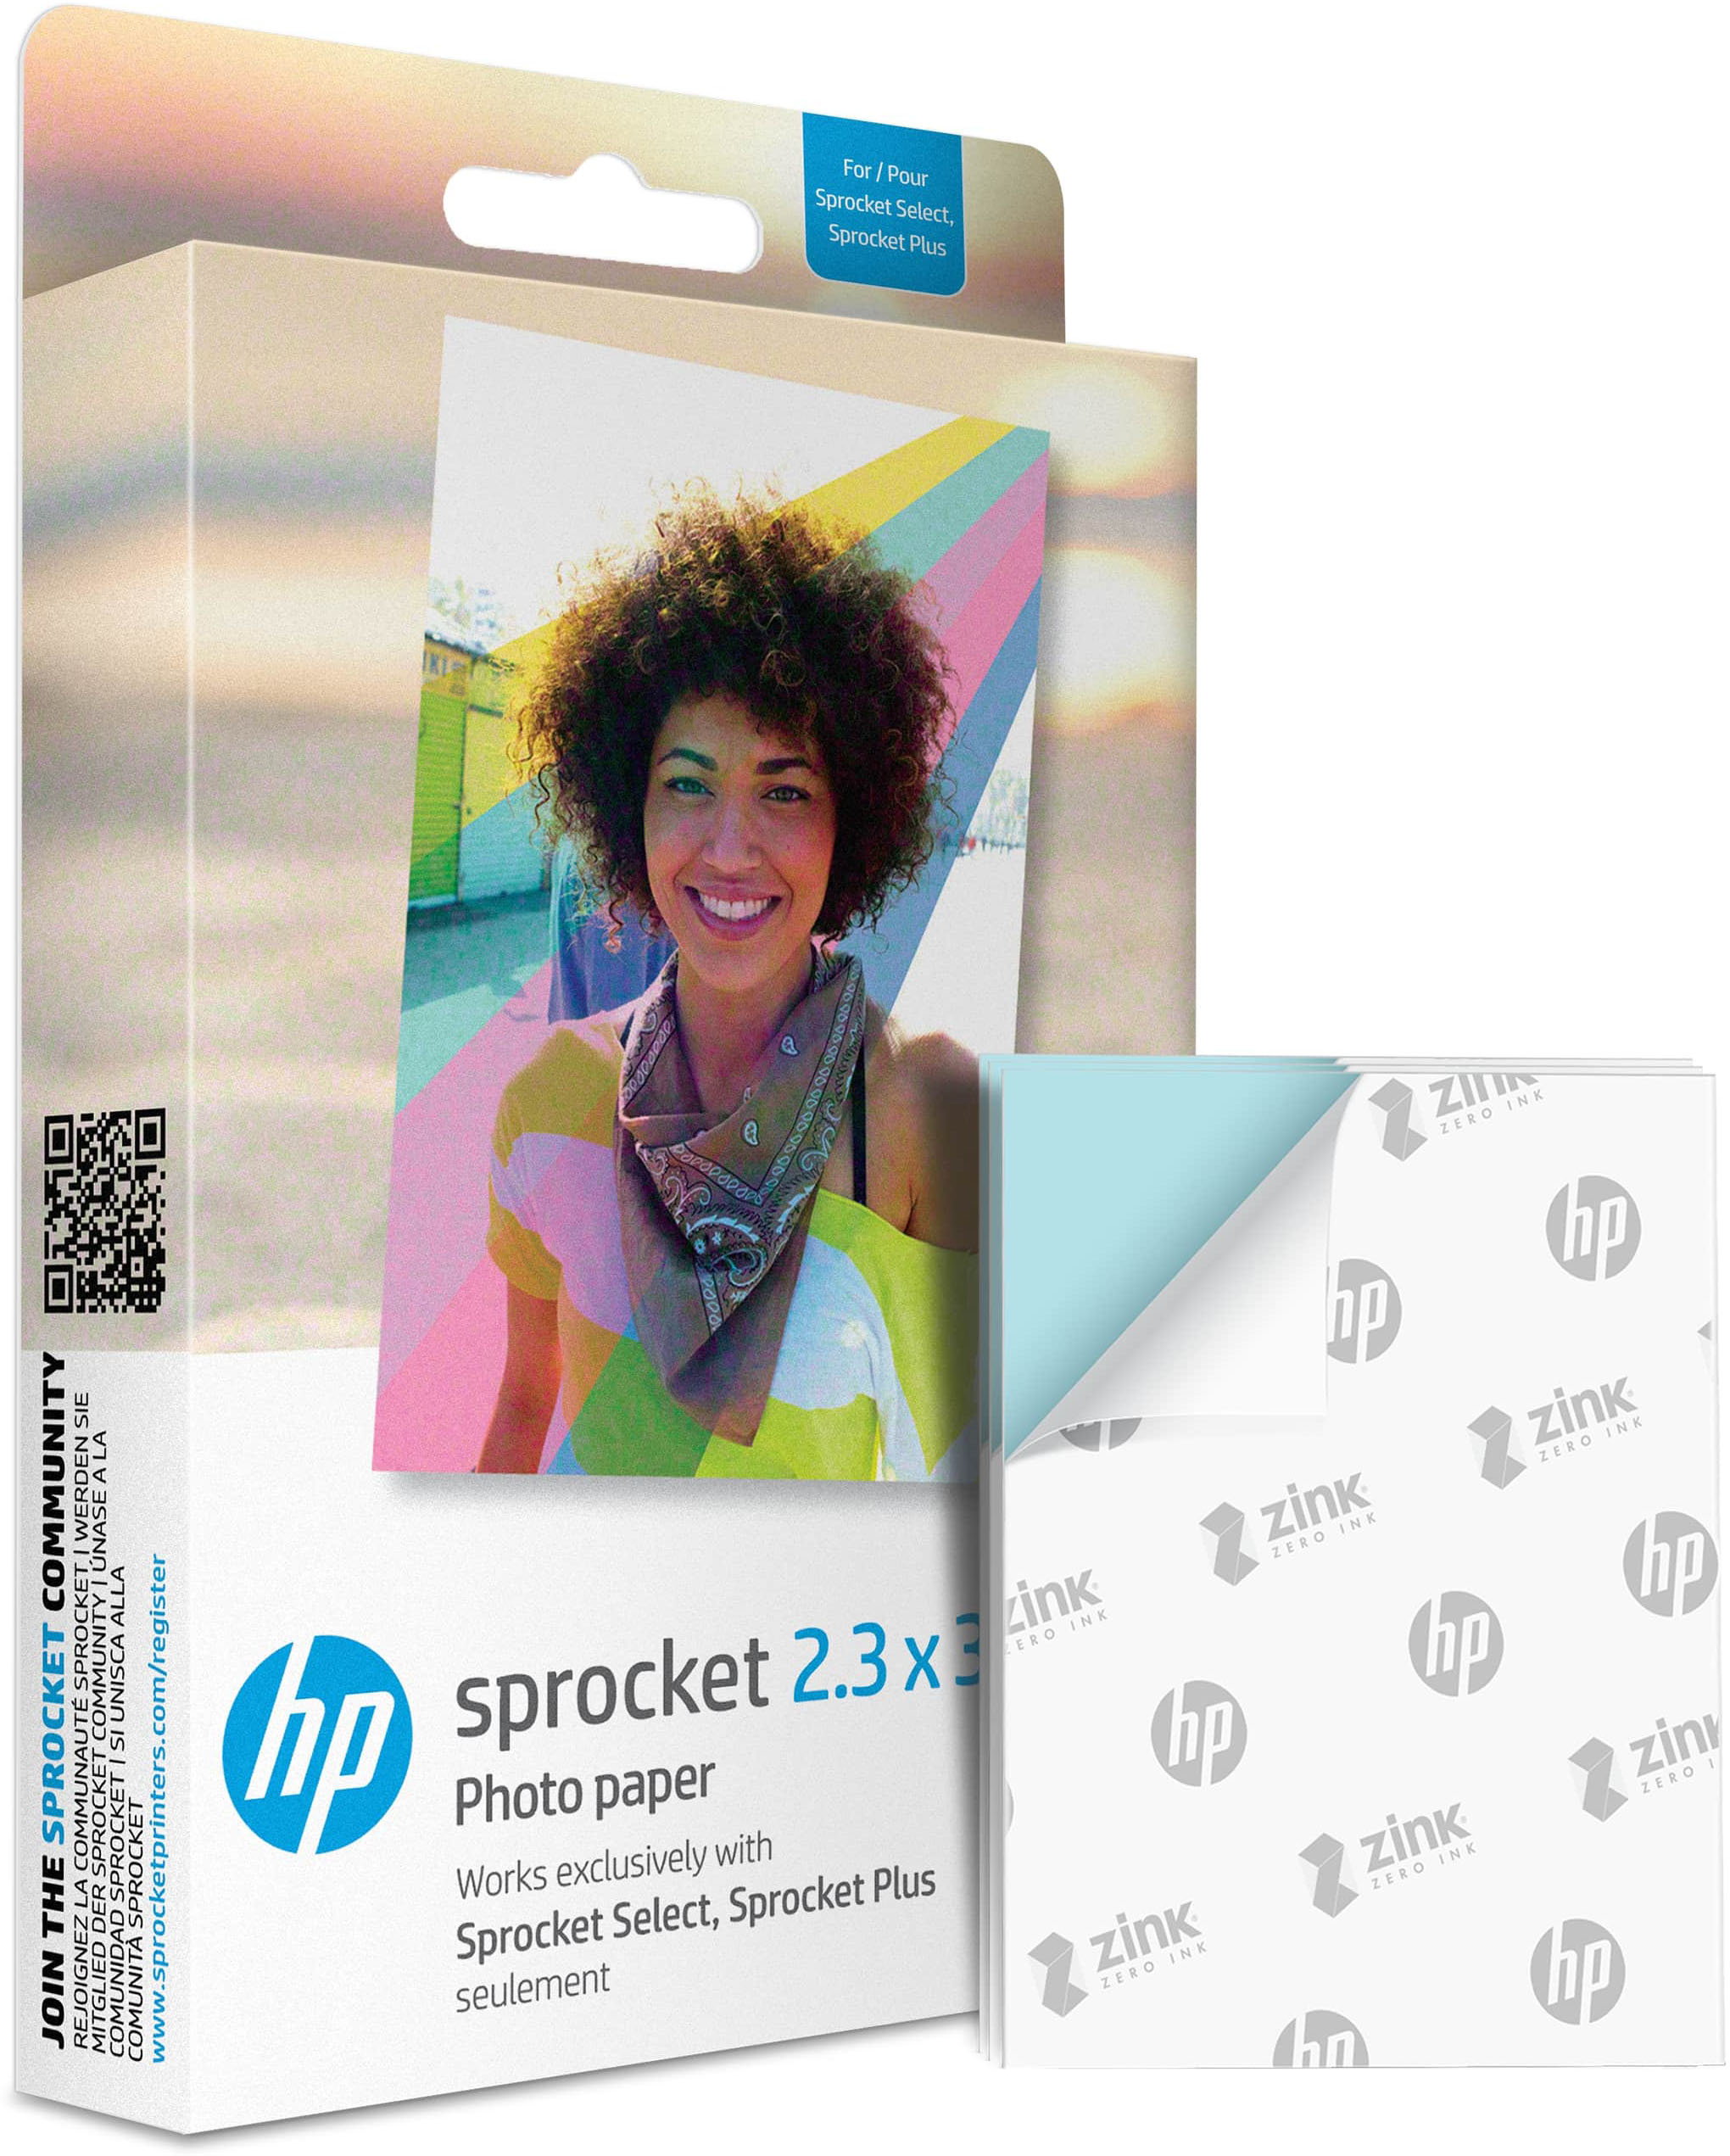 HP Sprocket 2x3 Premium Zink Sticky Back Photo Paper (20 Sheets) Compatible  with HP Sprocket Photo Printers.